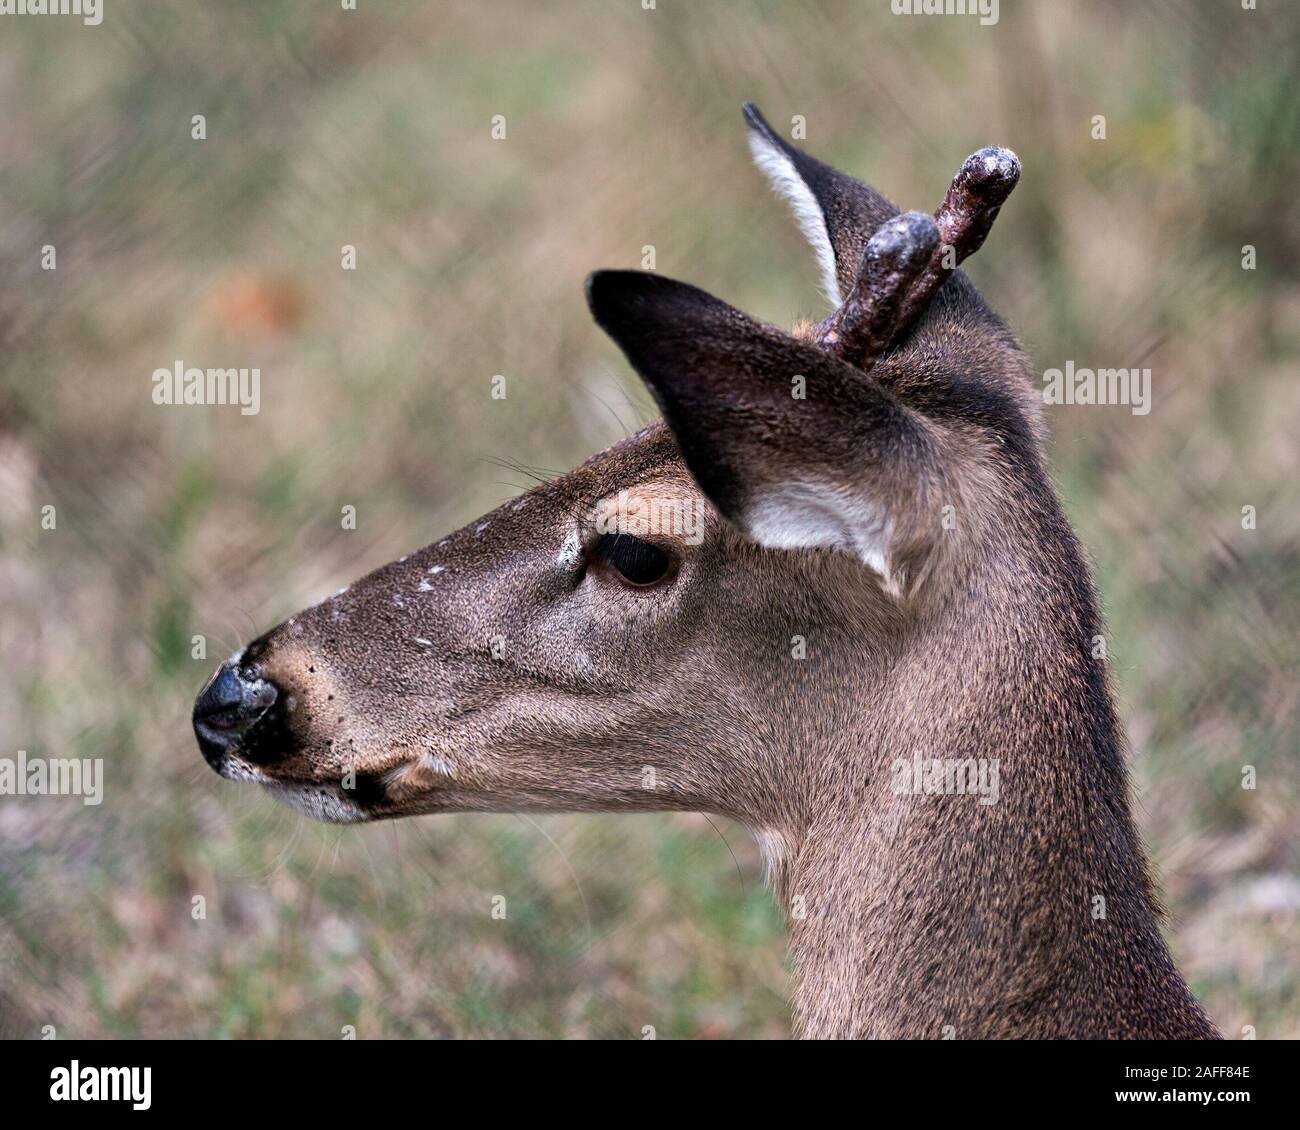 Deer animal White-tailed dear head close-up profile view with bokeh background displaying head, antlers, ears, eye, mouth, nose, brown fur in its surr Stock Photo